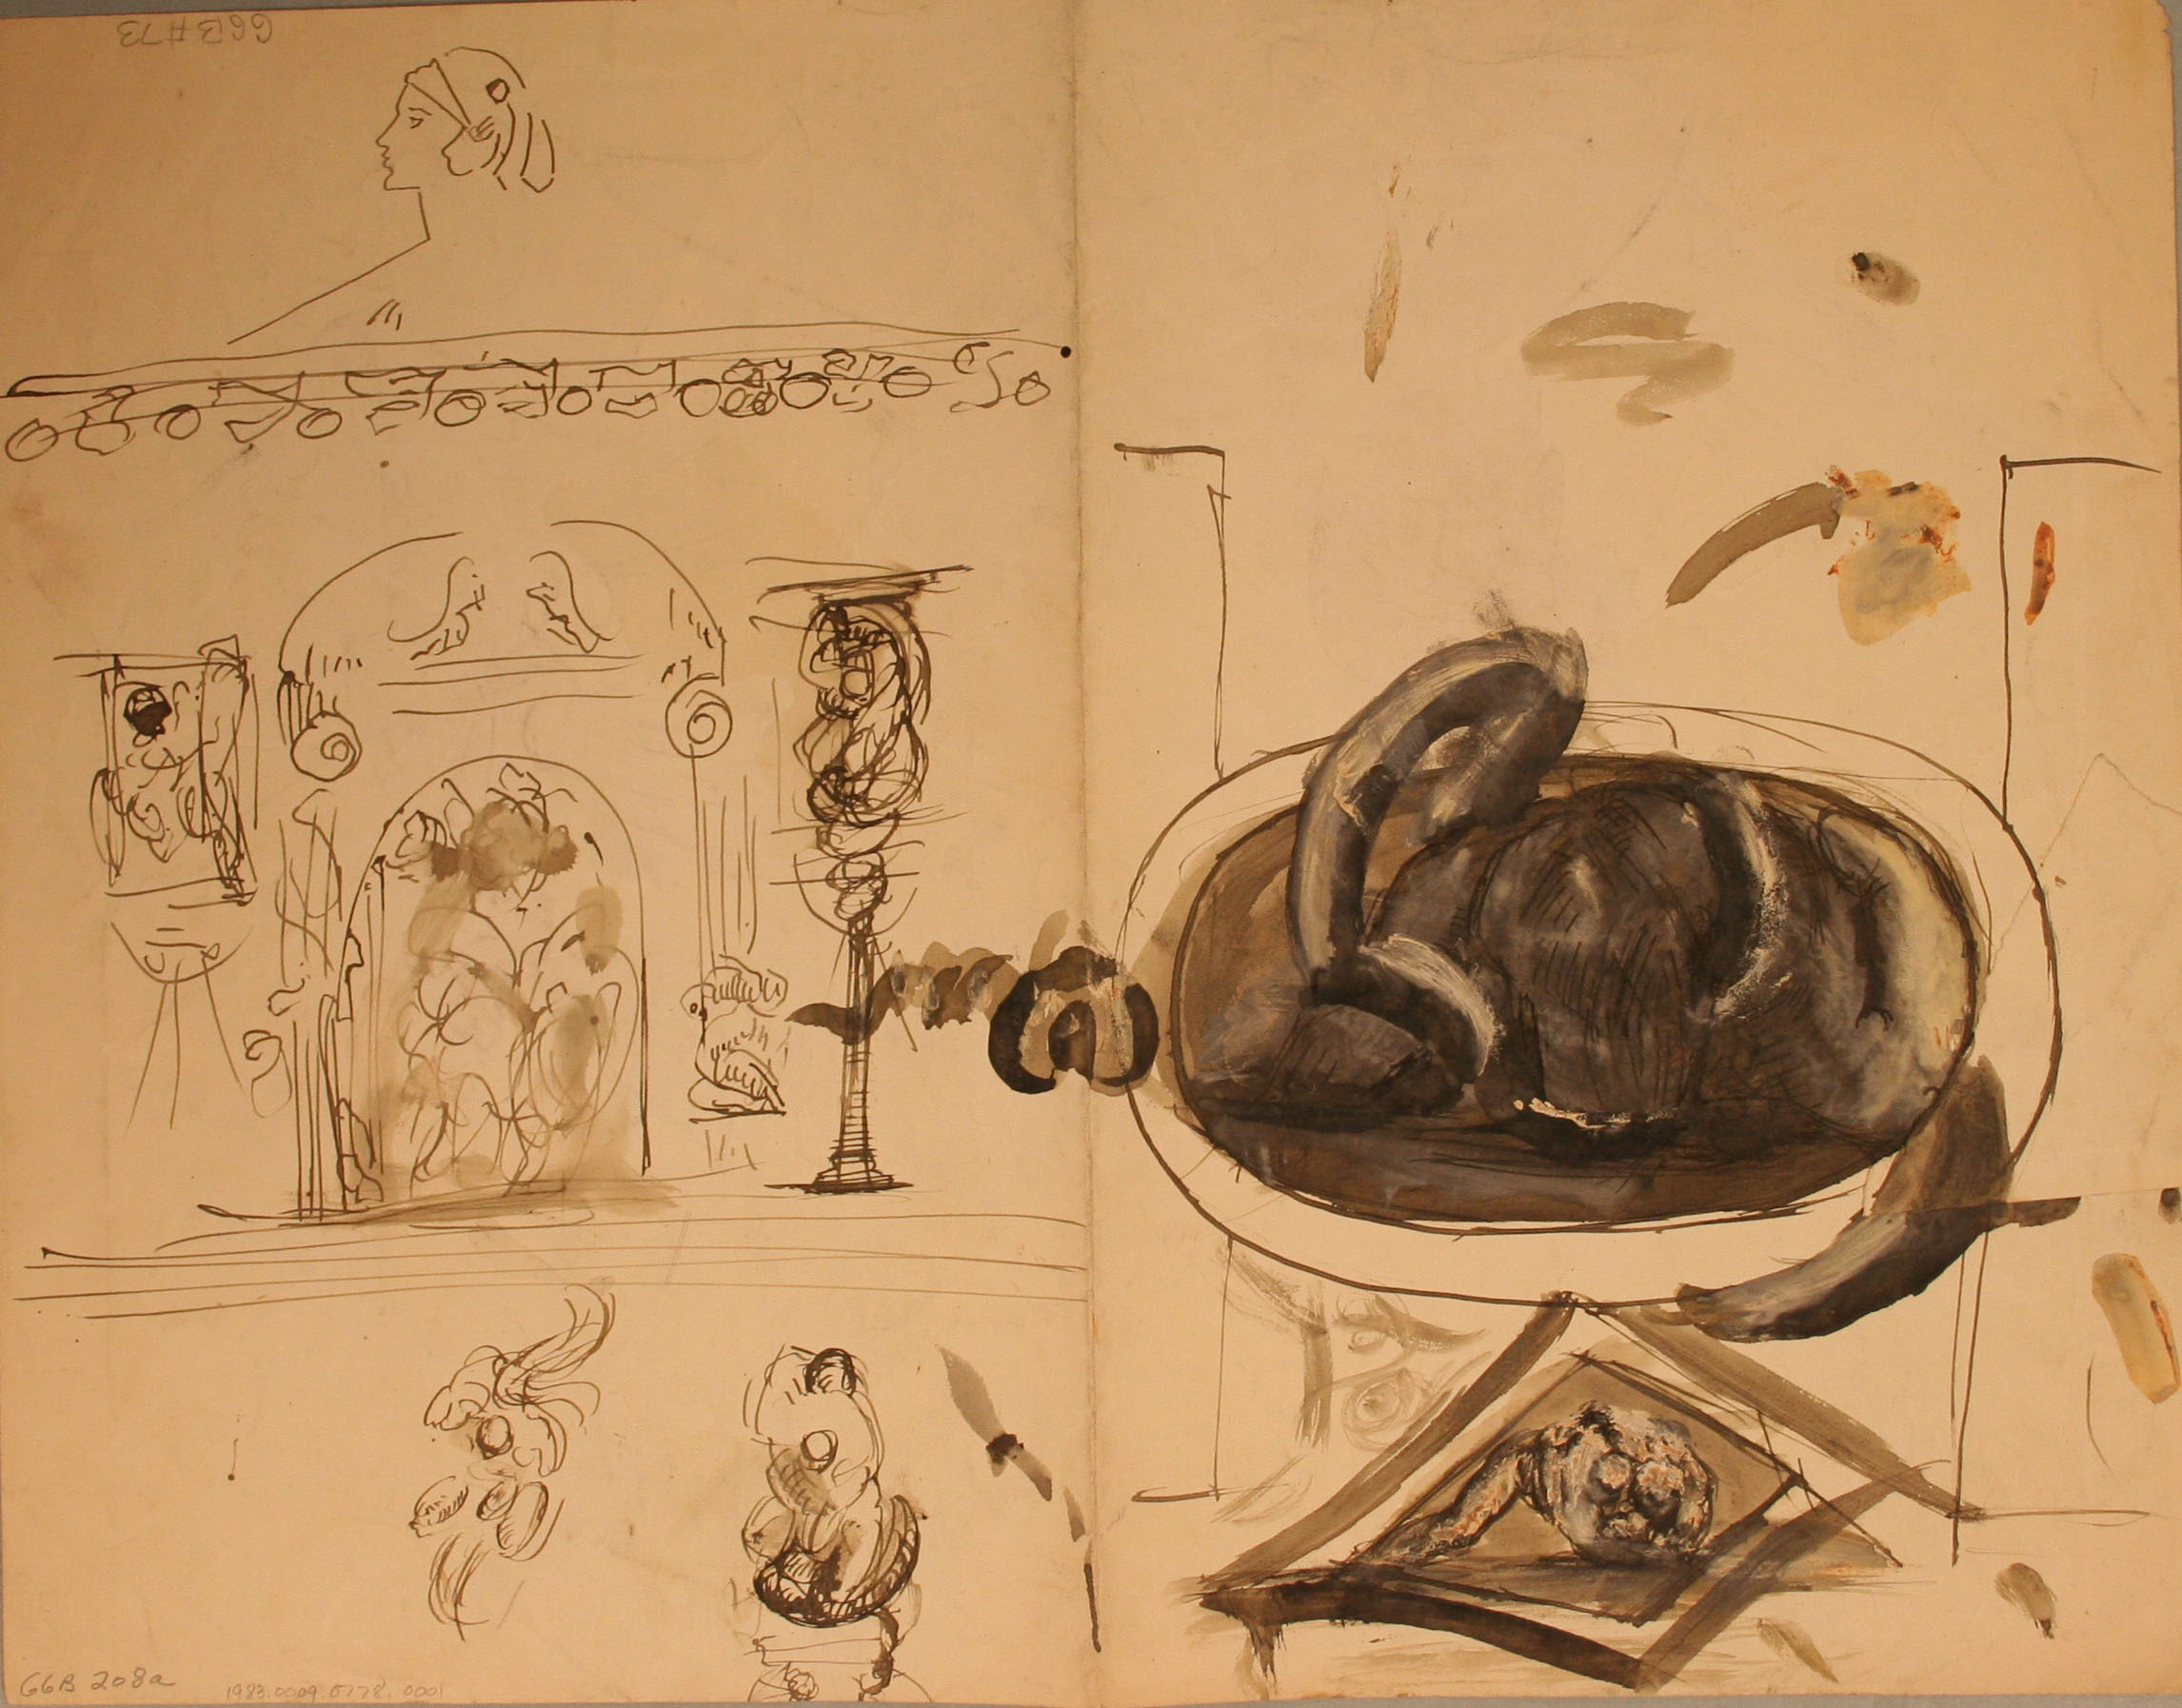 George Grey Barnard (American, 1863-1938), [<i>Studies</i>], 20th c., ink, wash, gouache. Museums Collections, Gift of Tony Barnard and Barnard Family